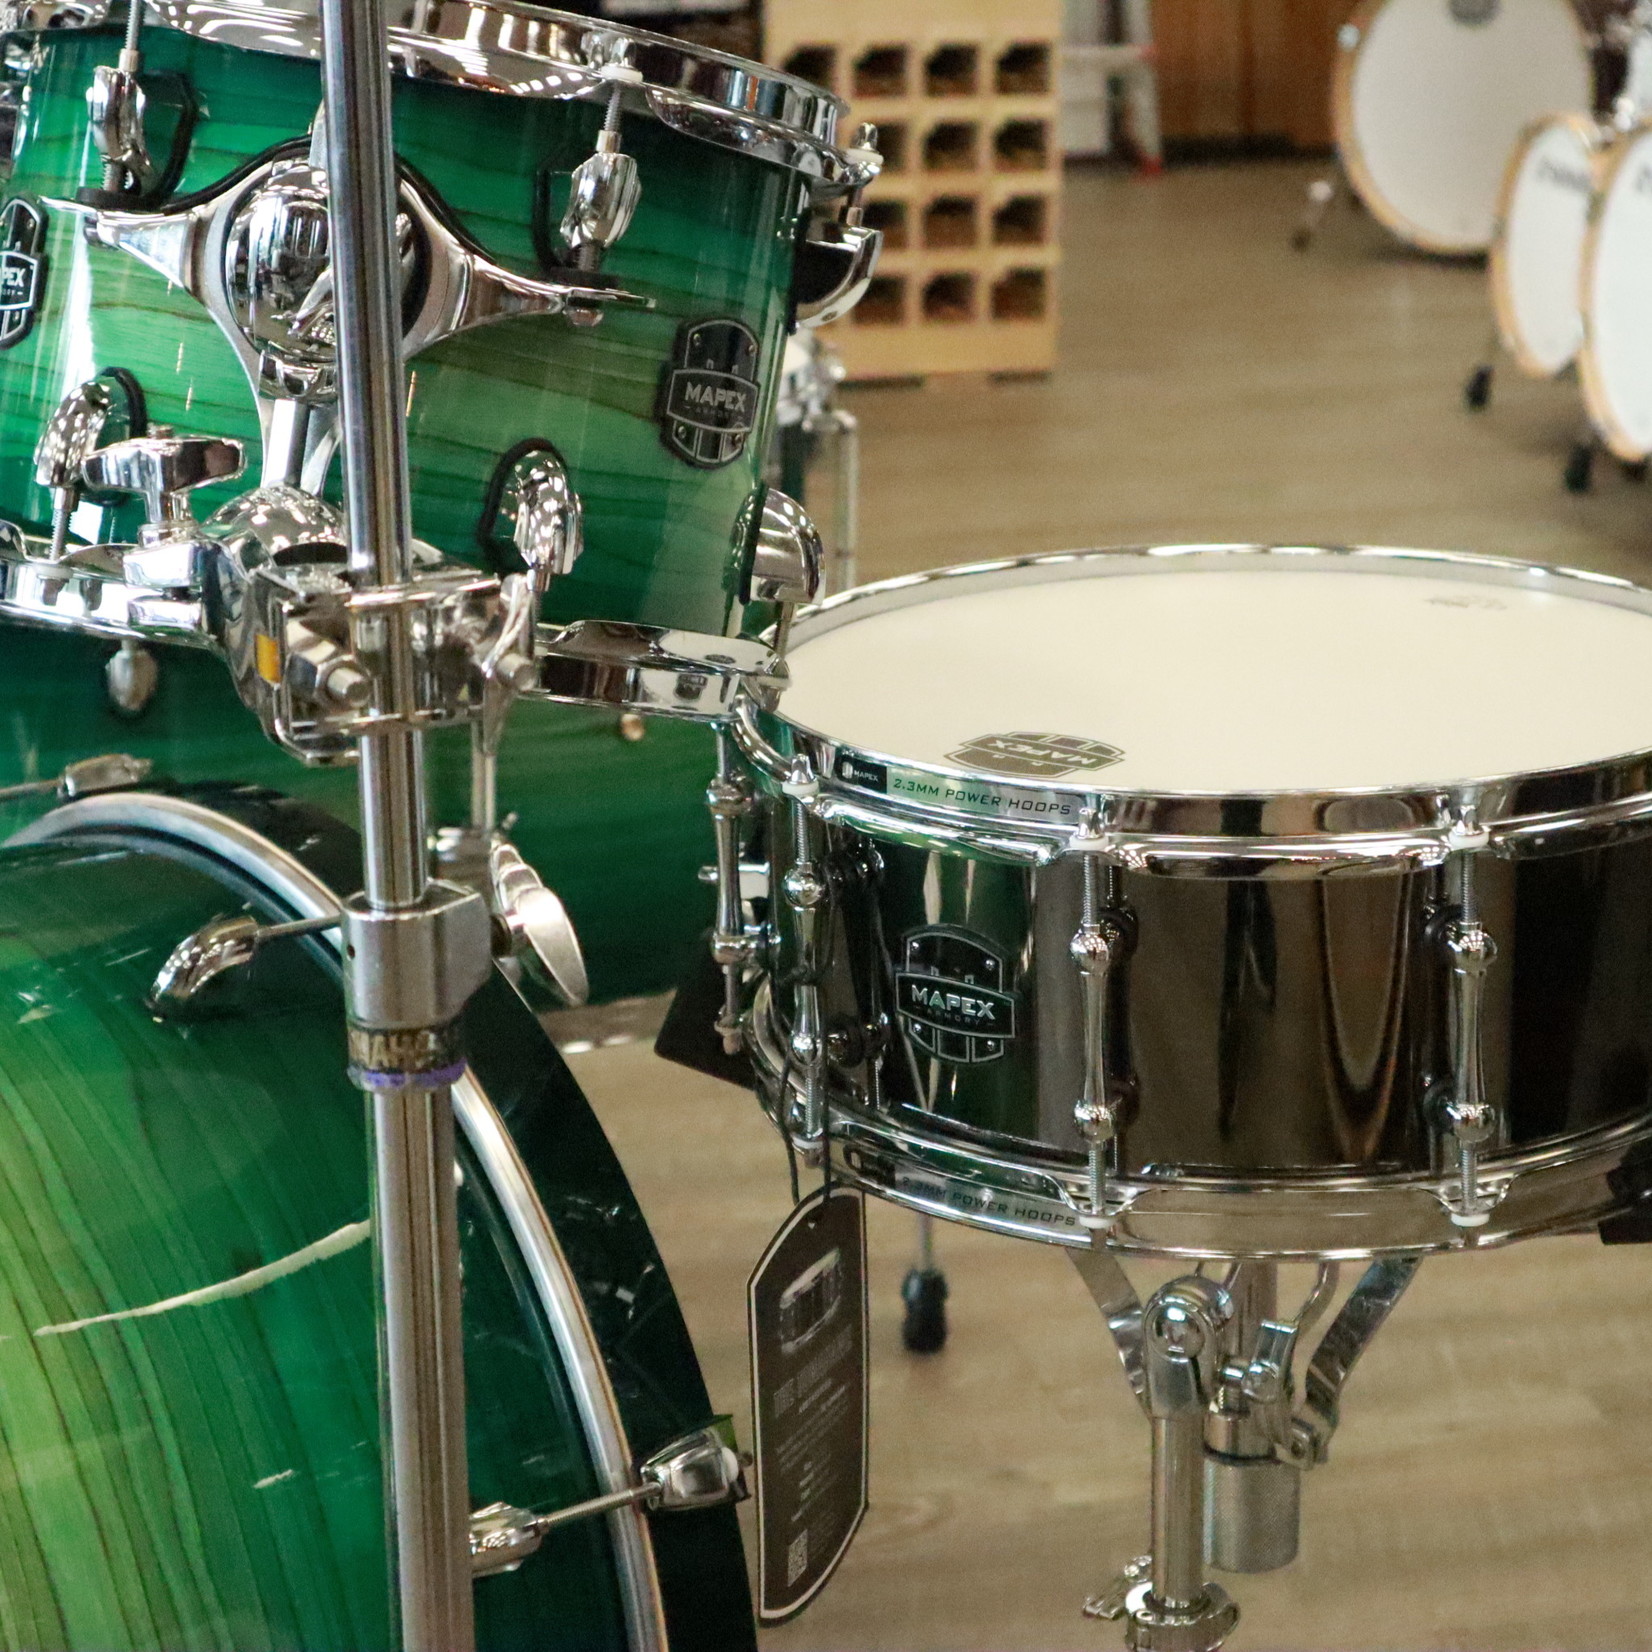 Mapex Mapex Armory 6-Pc Studioease Fast Shell Pack 10/12/14/16/22/14s (Emerald Burst) AR628SFUFG